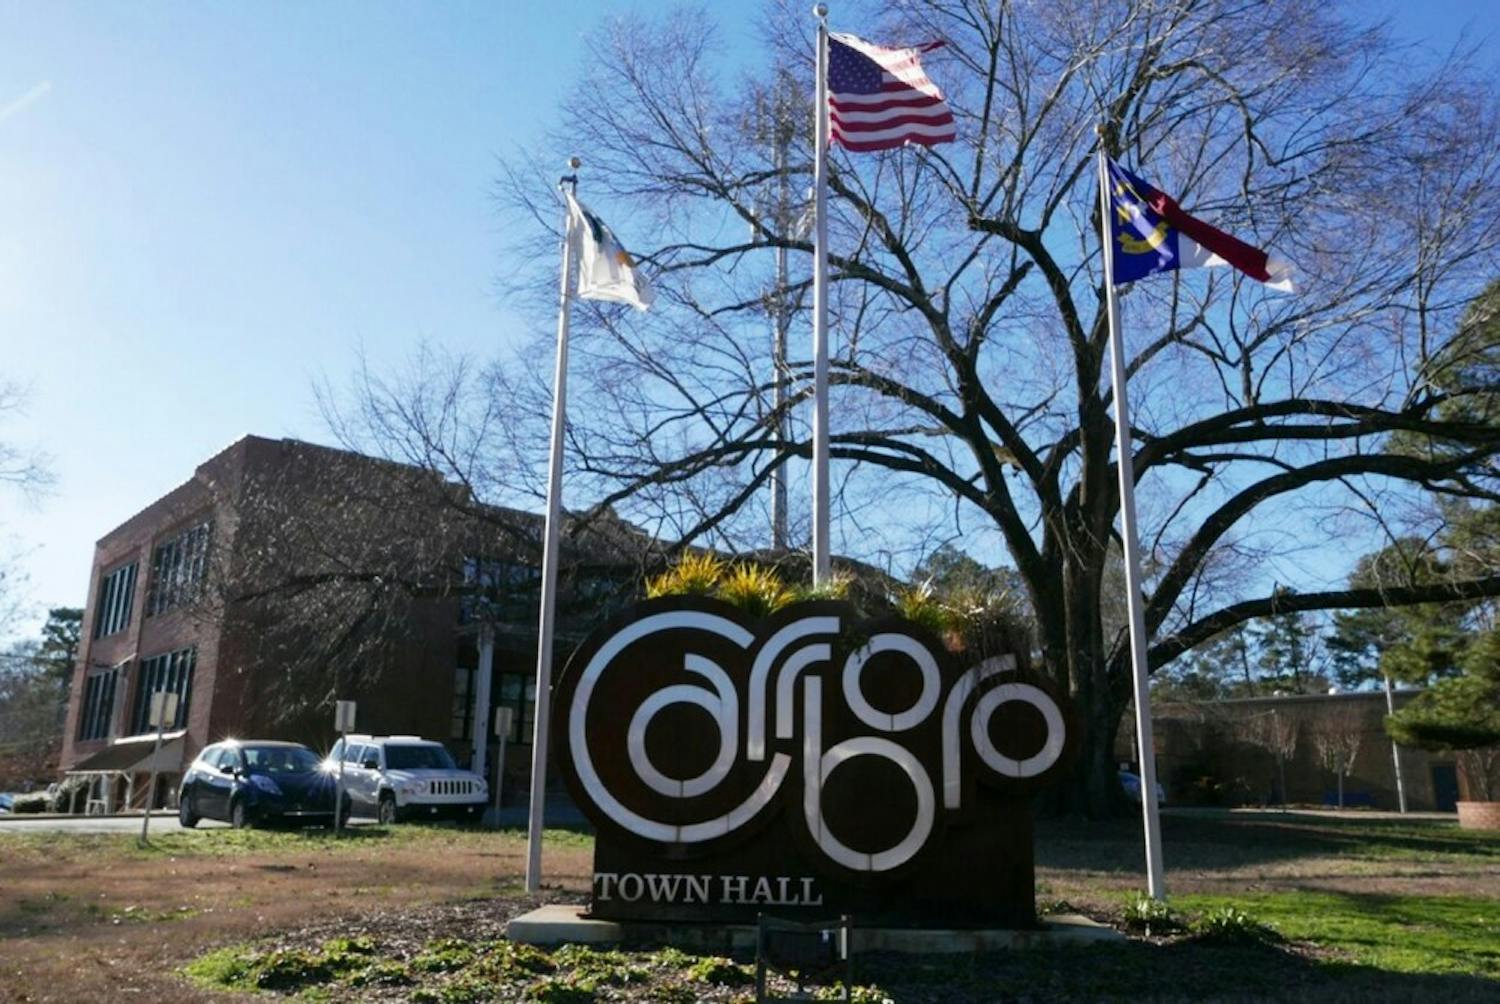 Carrboro town sign